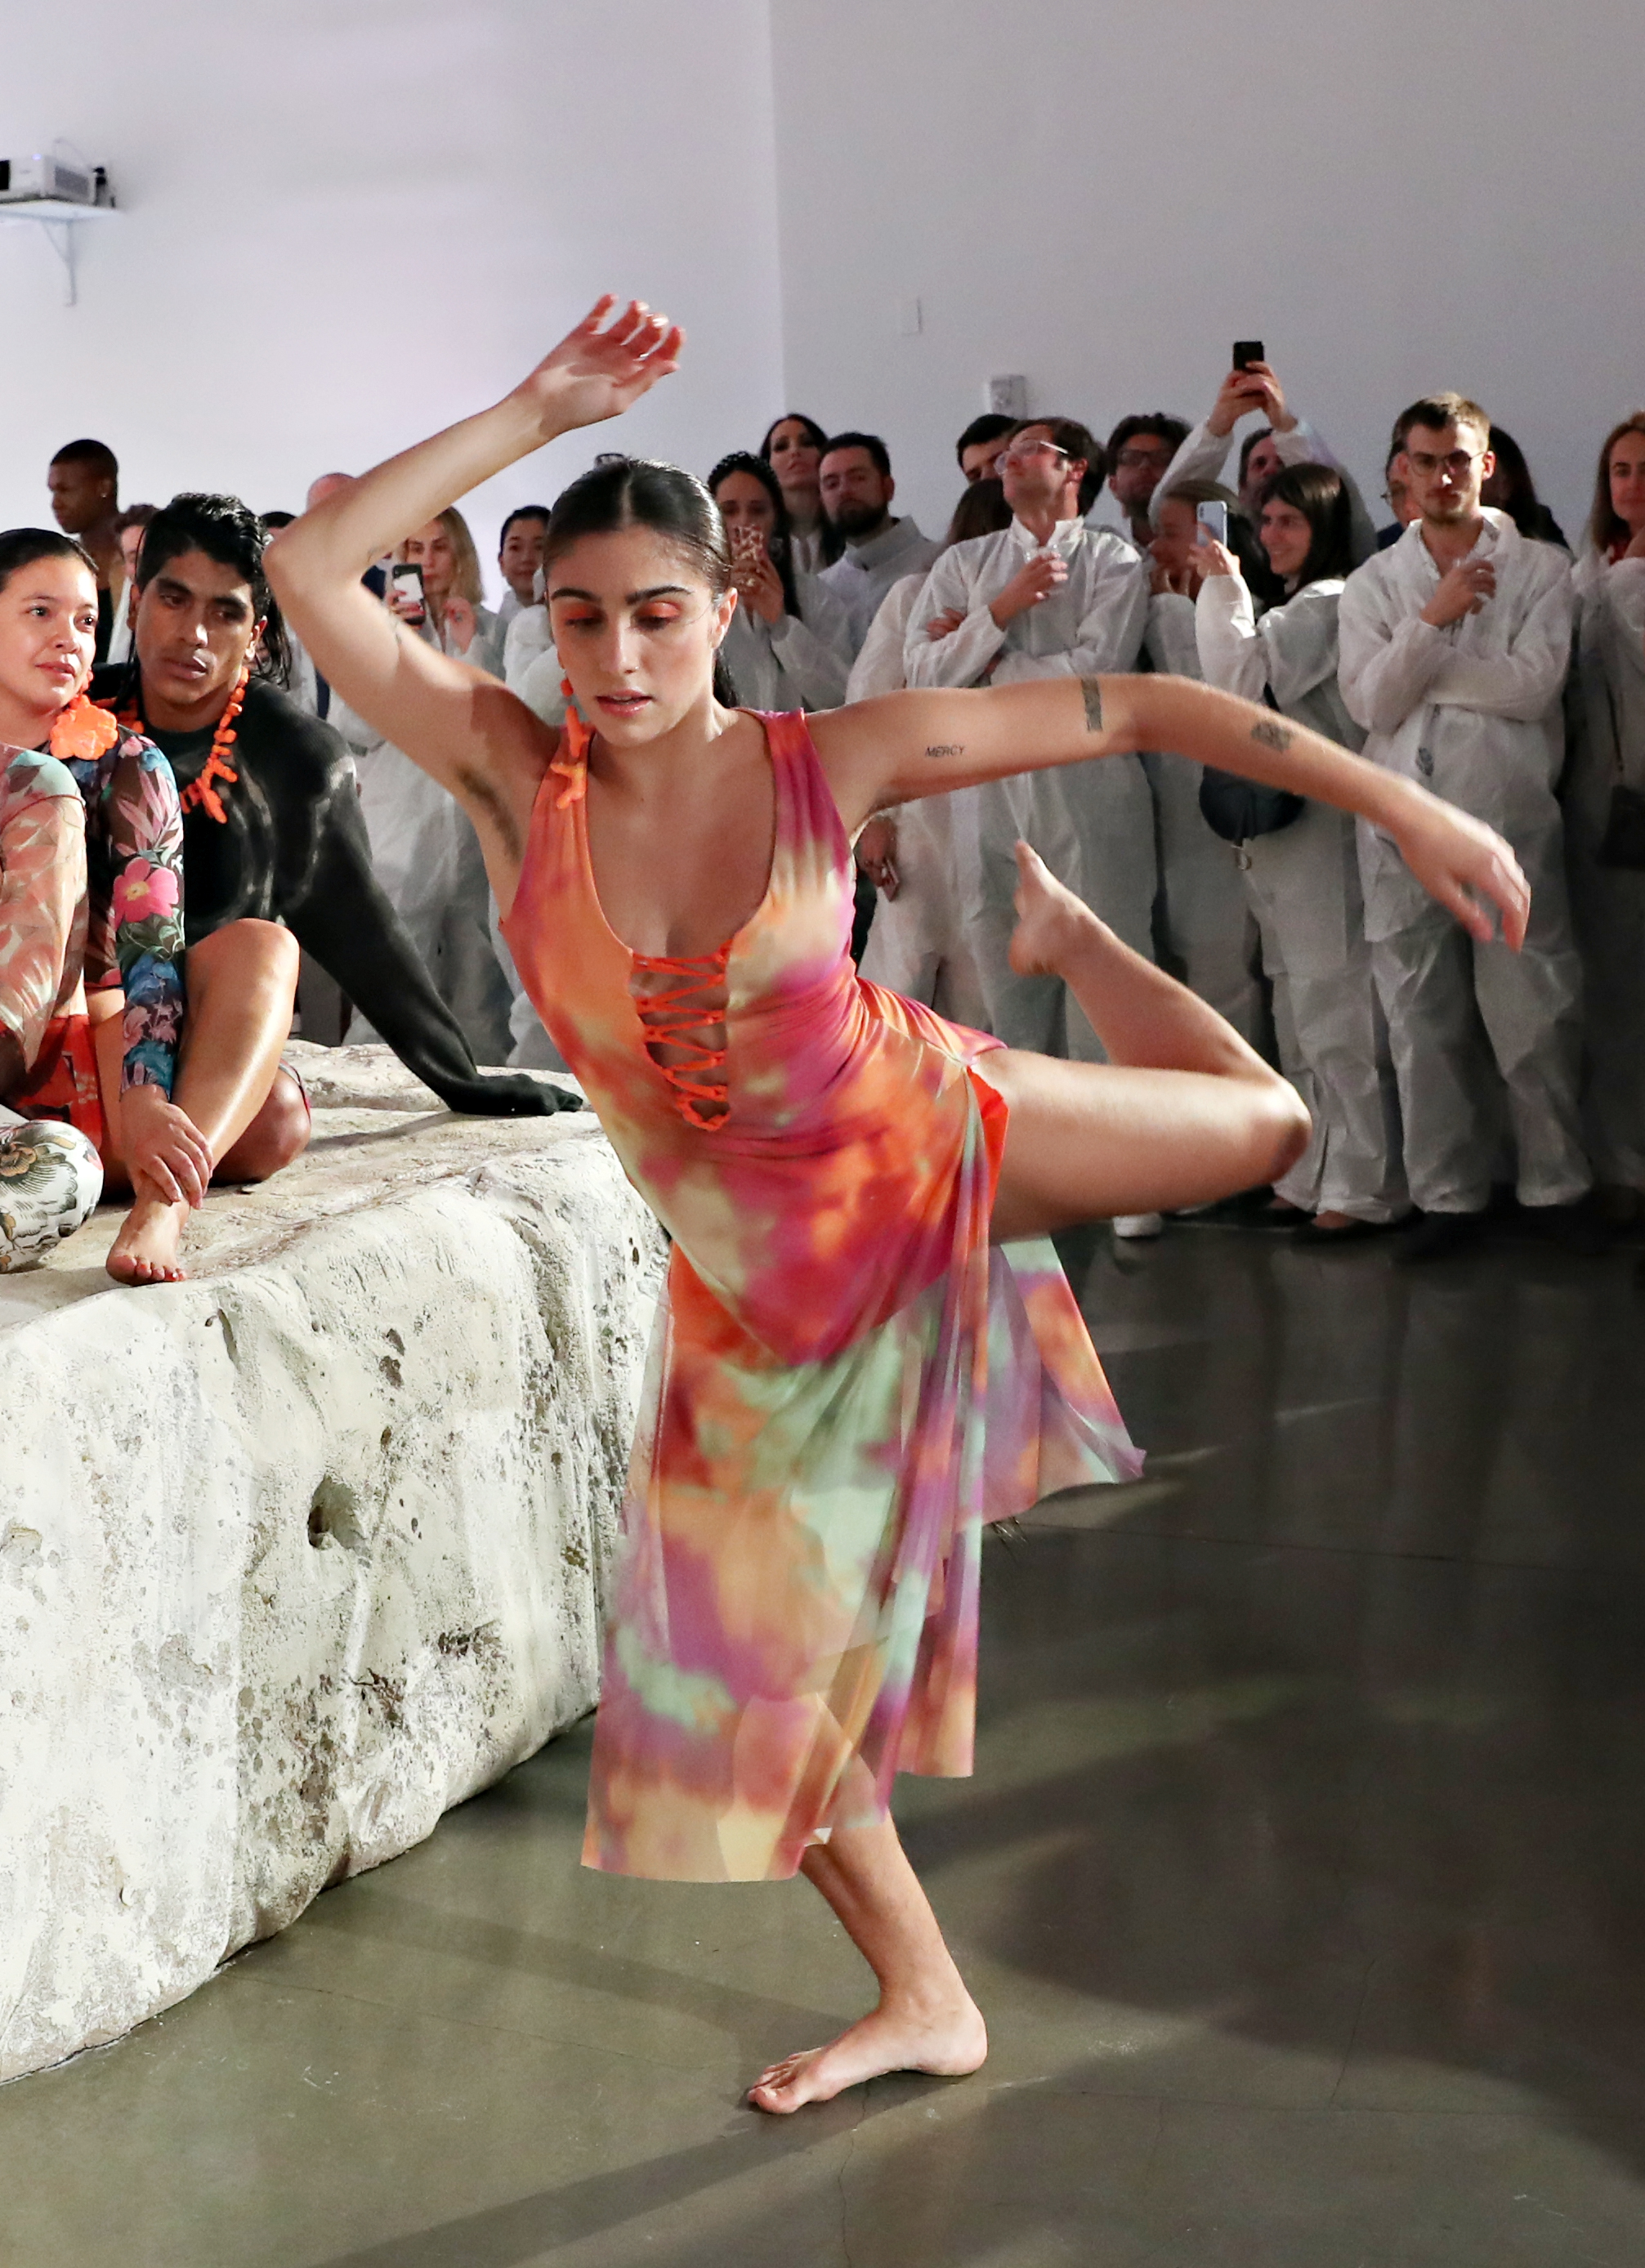 Madonna's daughter Lourdes "Lola" Leon performs Art Basel Miami on December 6, 2019 in Miami Beach, Florida | Source: Getty Images